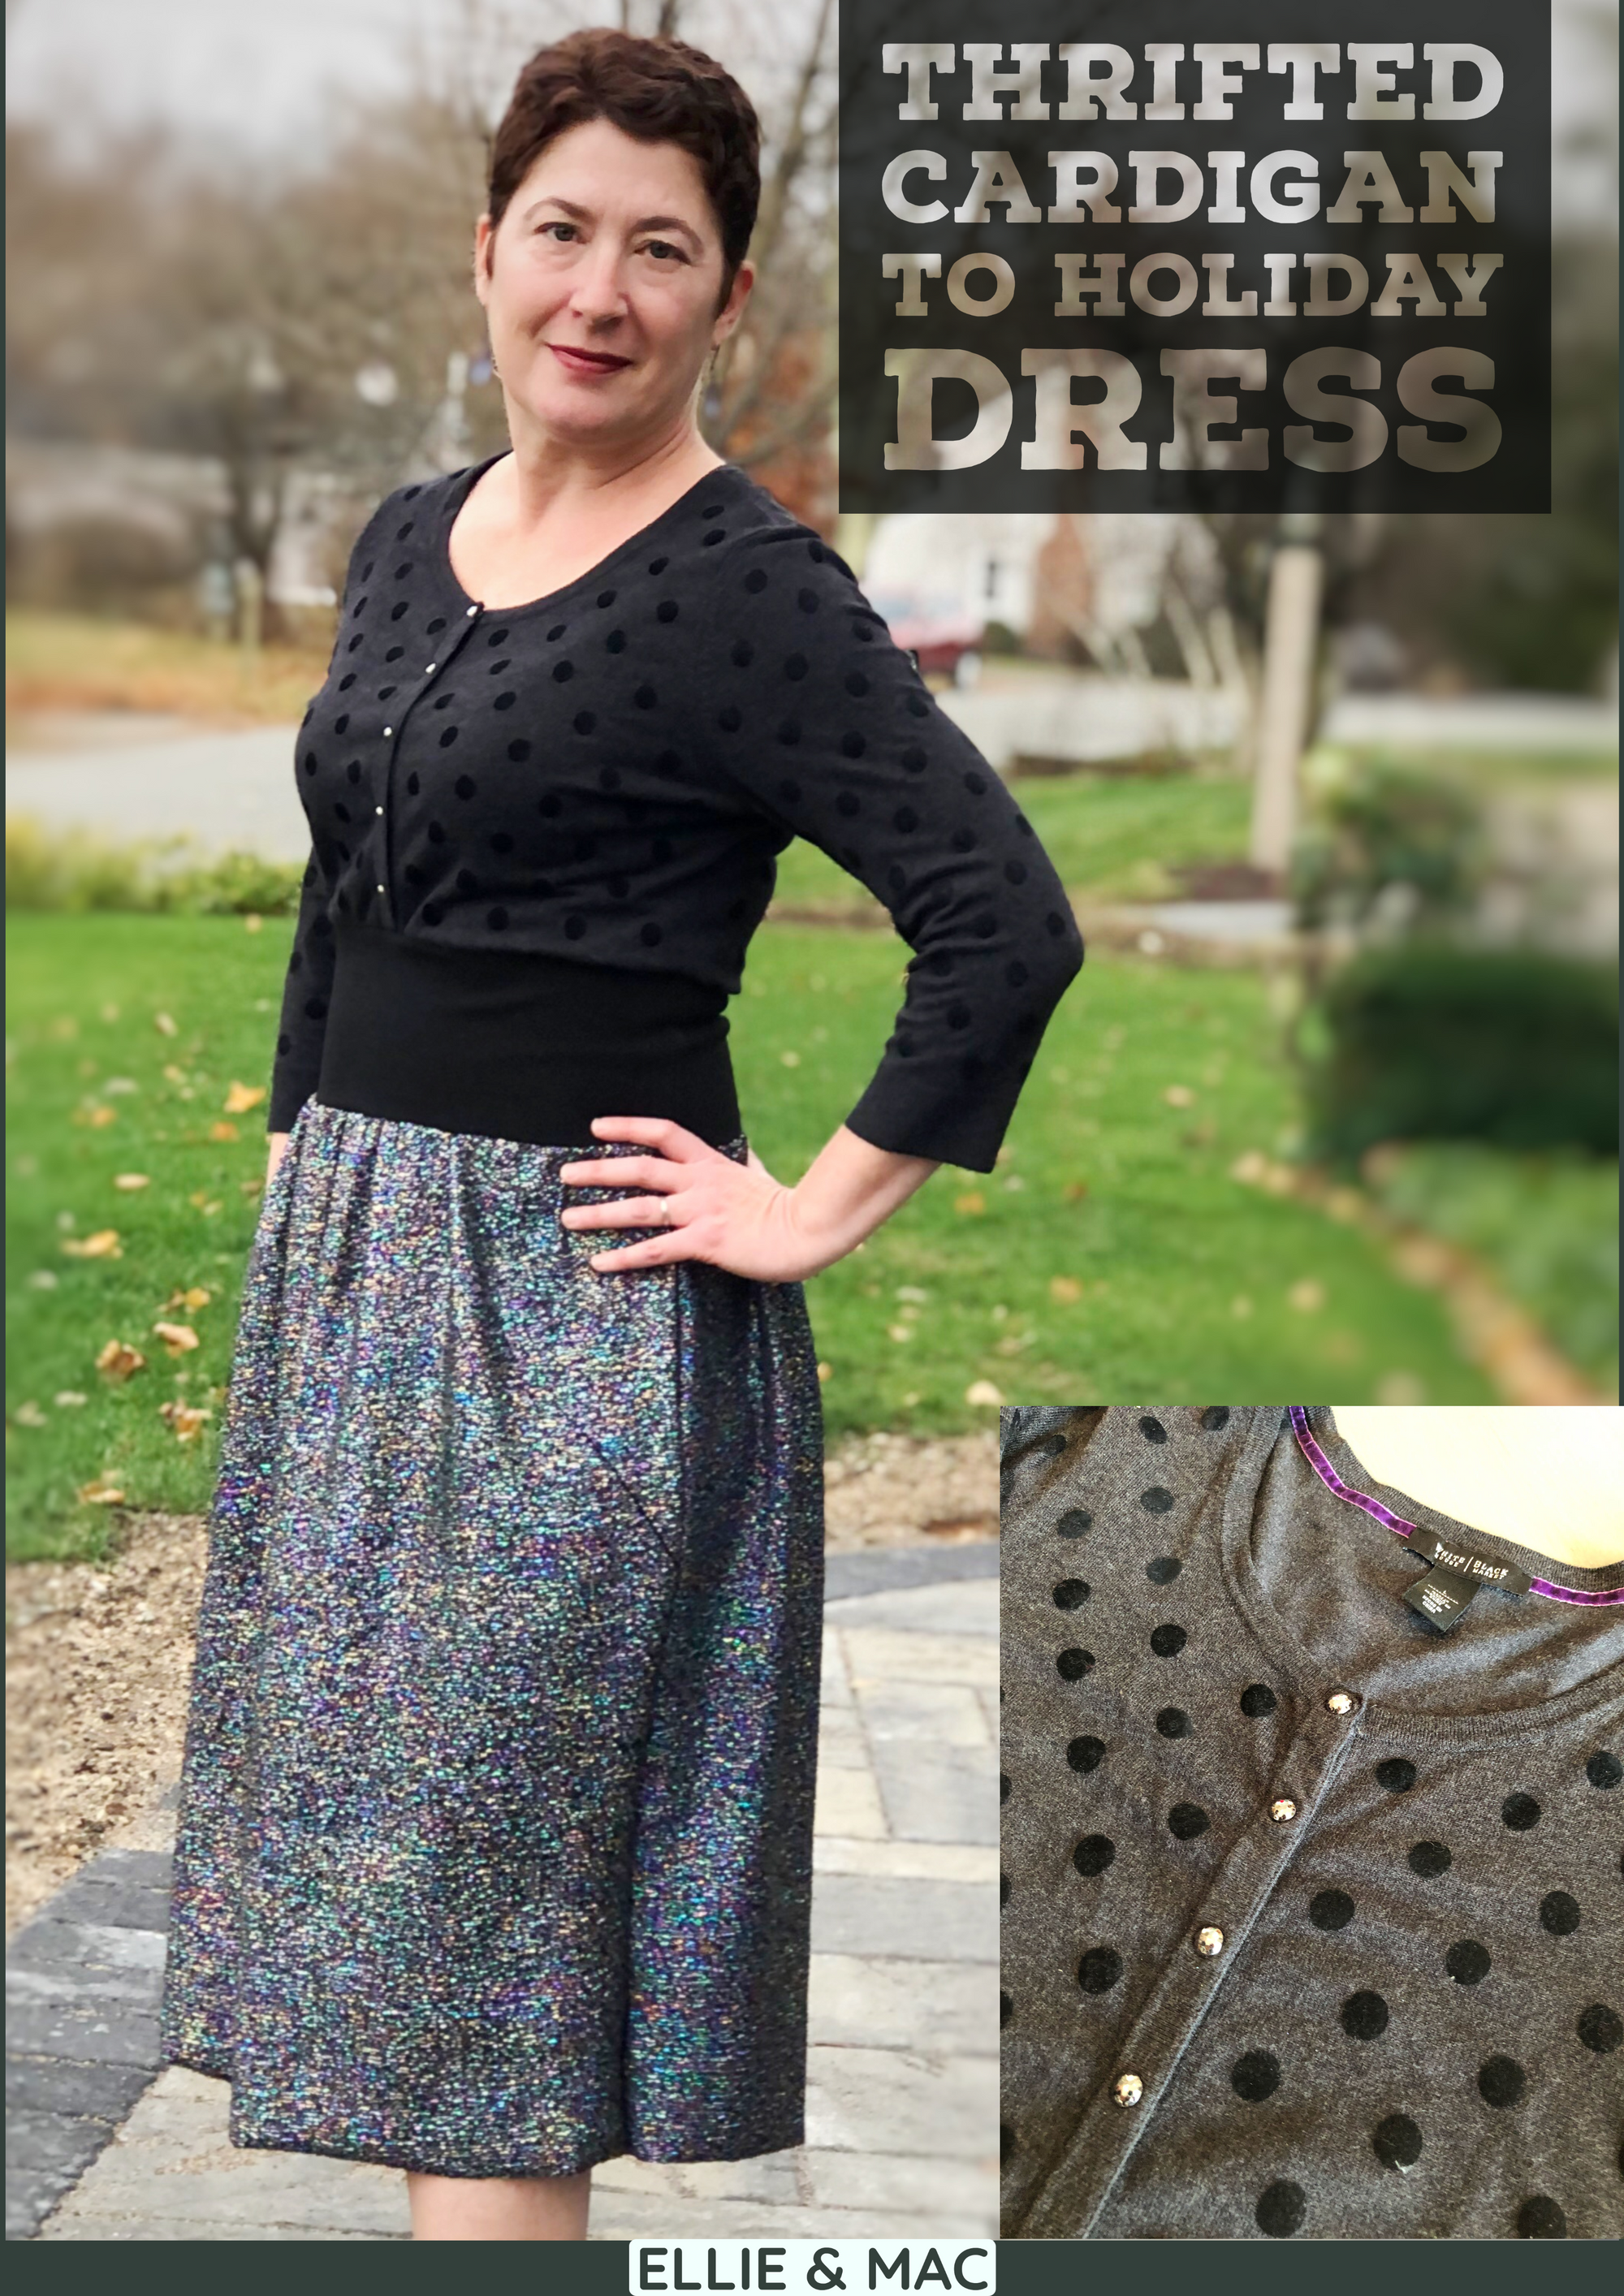 Thrifted Cardigan to Holiday Dress – Refashion Plus Two Pattern Mashup!